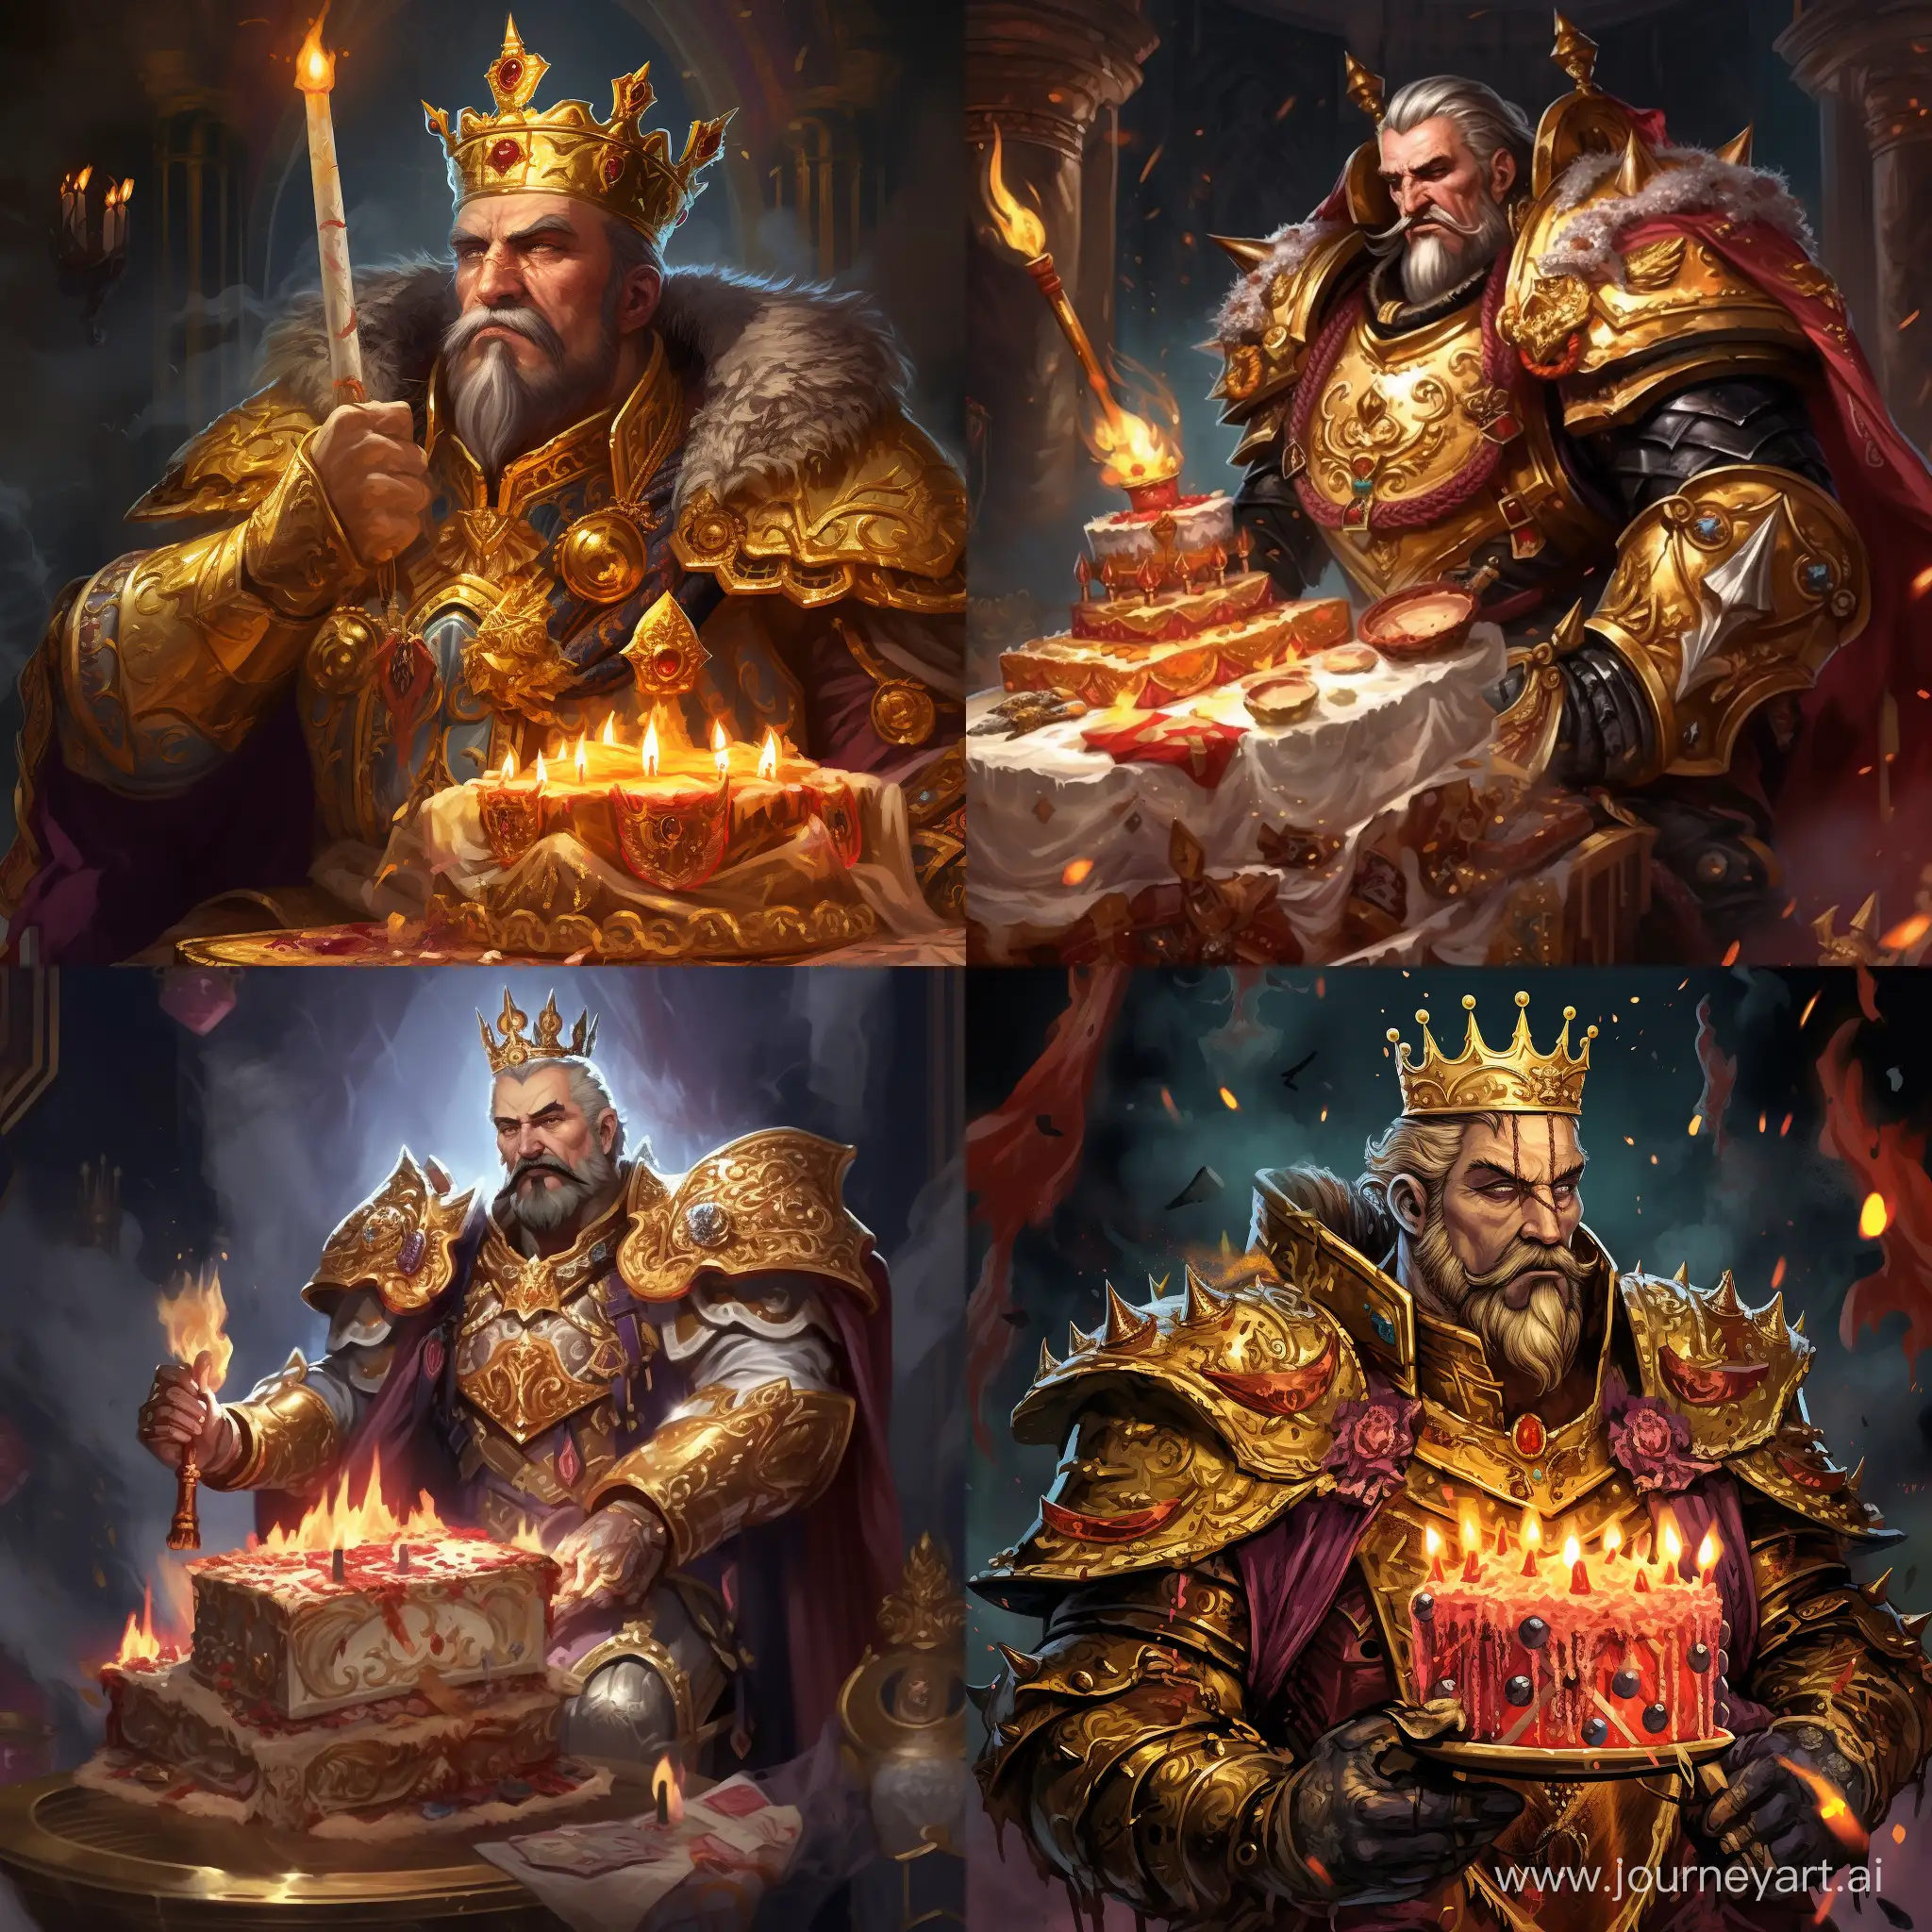 User I want a picture of the God Emperor of Warhammer, in its original chaotic art style. Make him hold a birthday cake. Also, make him blonde and have a blonde mustache. Make him glorious